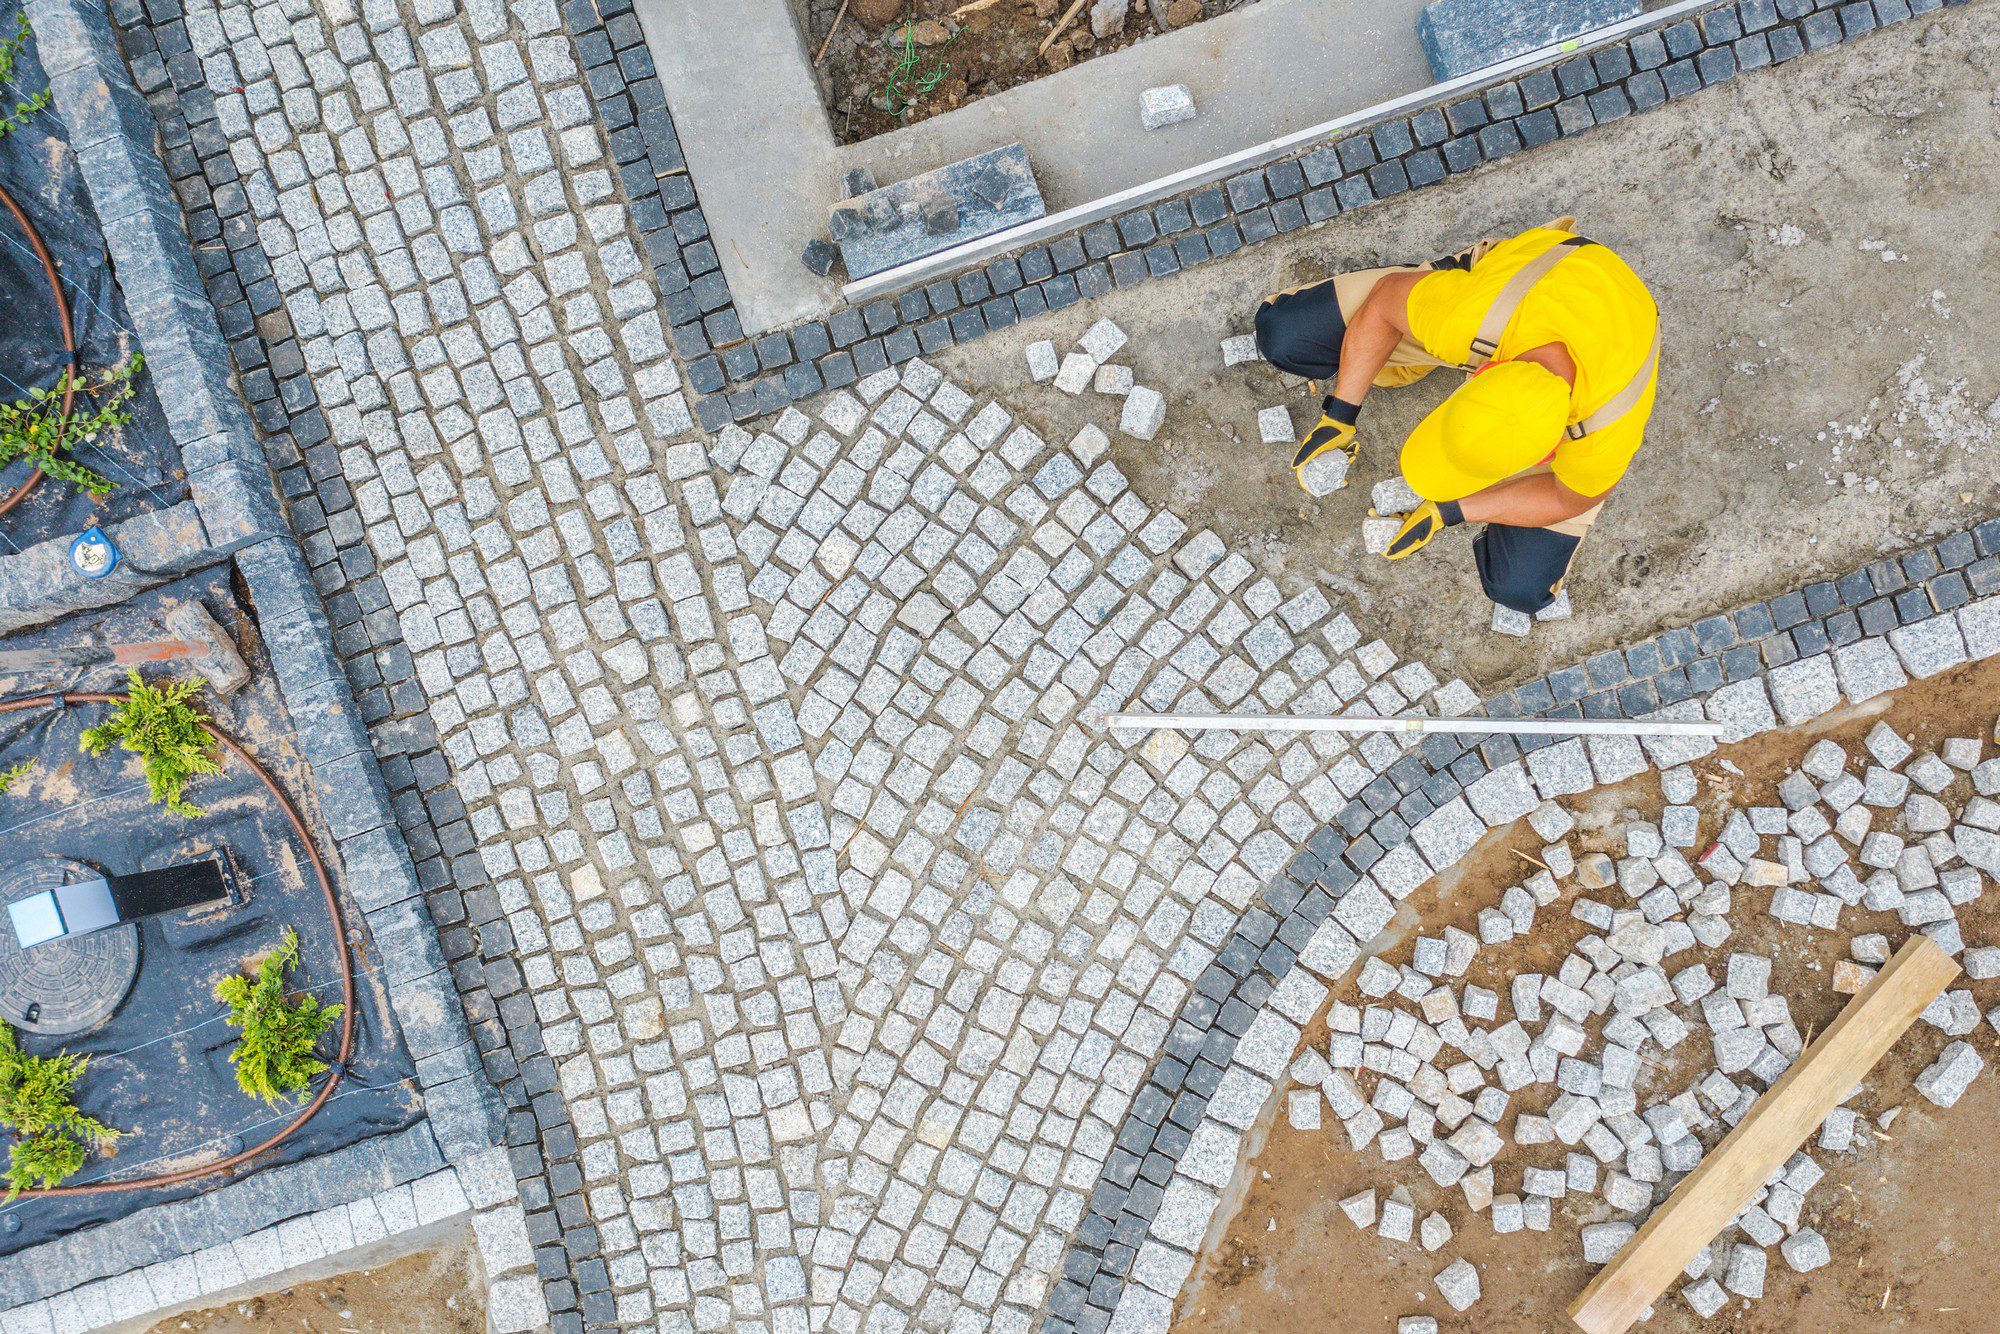 This image shows an aerial view of a person working on installing or repairing a cobblestone pavement. The worker is wearing a yellow high-visibility jacket and hat, indicating that this might be a construction or street maintenance site. There are sections of the pavement with different patterns and colours of cobblestones. Near the worker, there are piles of cobblestones that have yet to be laid, and a wooden plank is also visible on the ground nearby, which may be used to align the stones or as a walking surface. Around the area, there are metal edges and a manhole cover, suggesting this work is part of urban infrastructure development or maintenance.